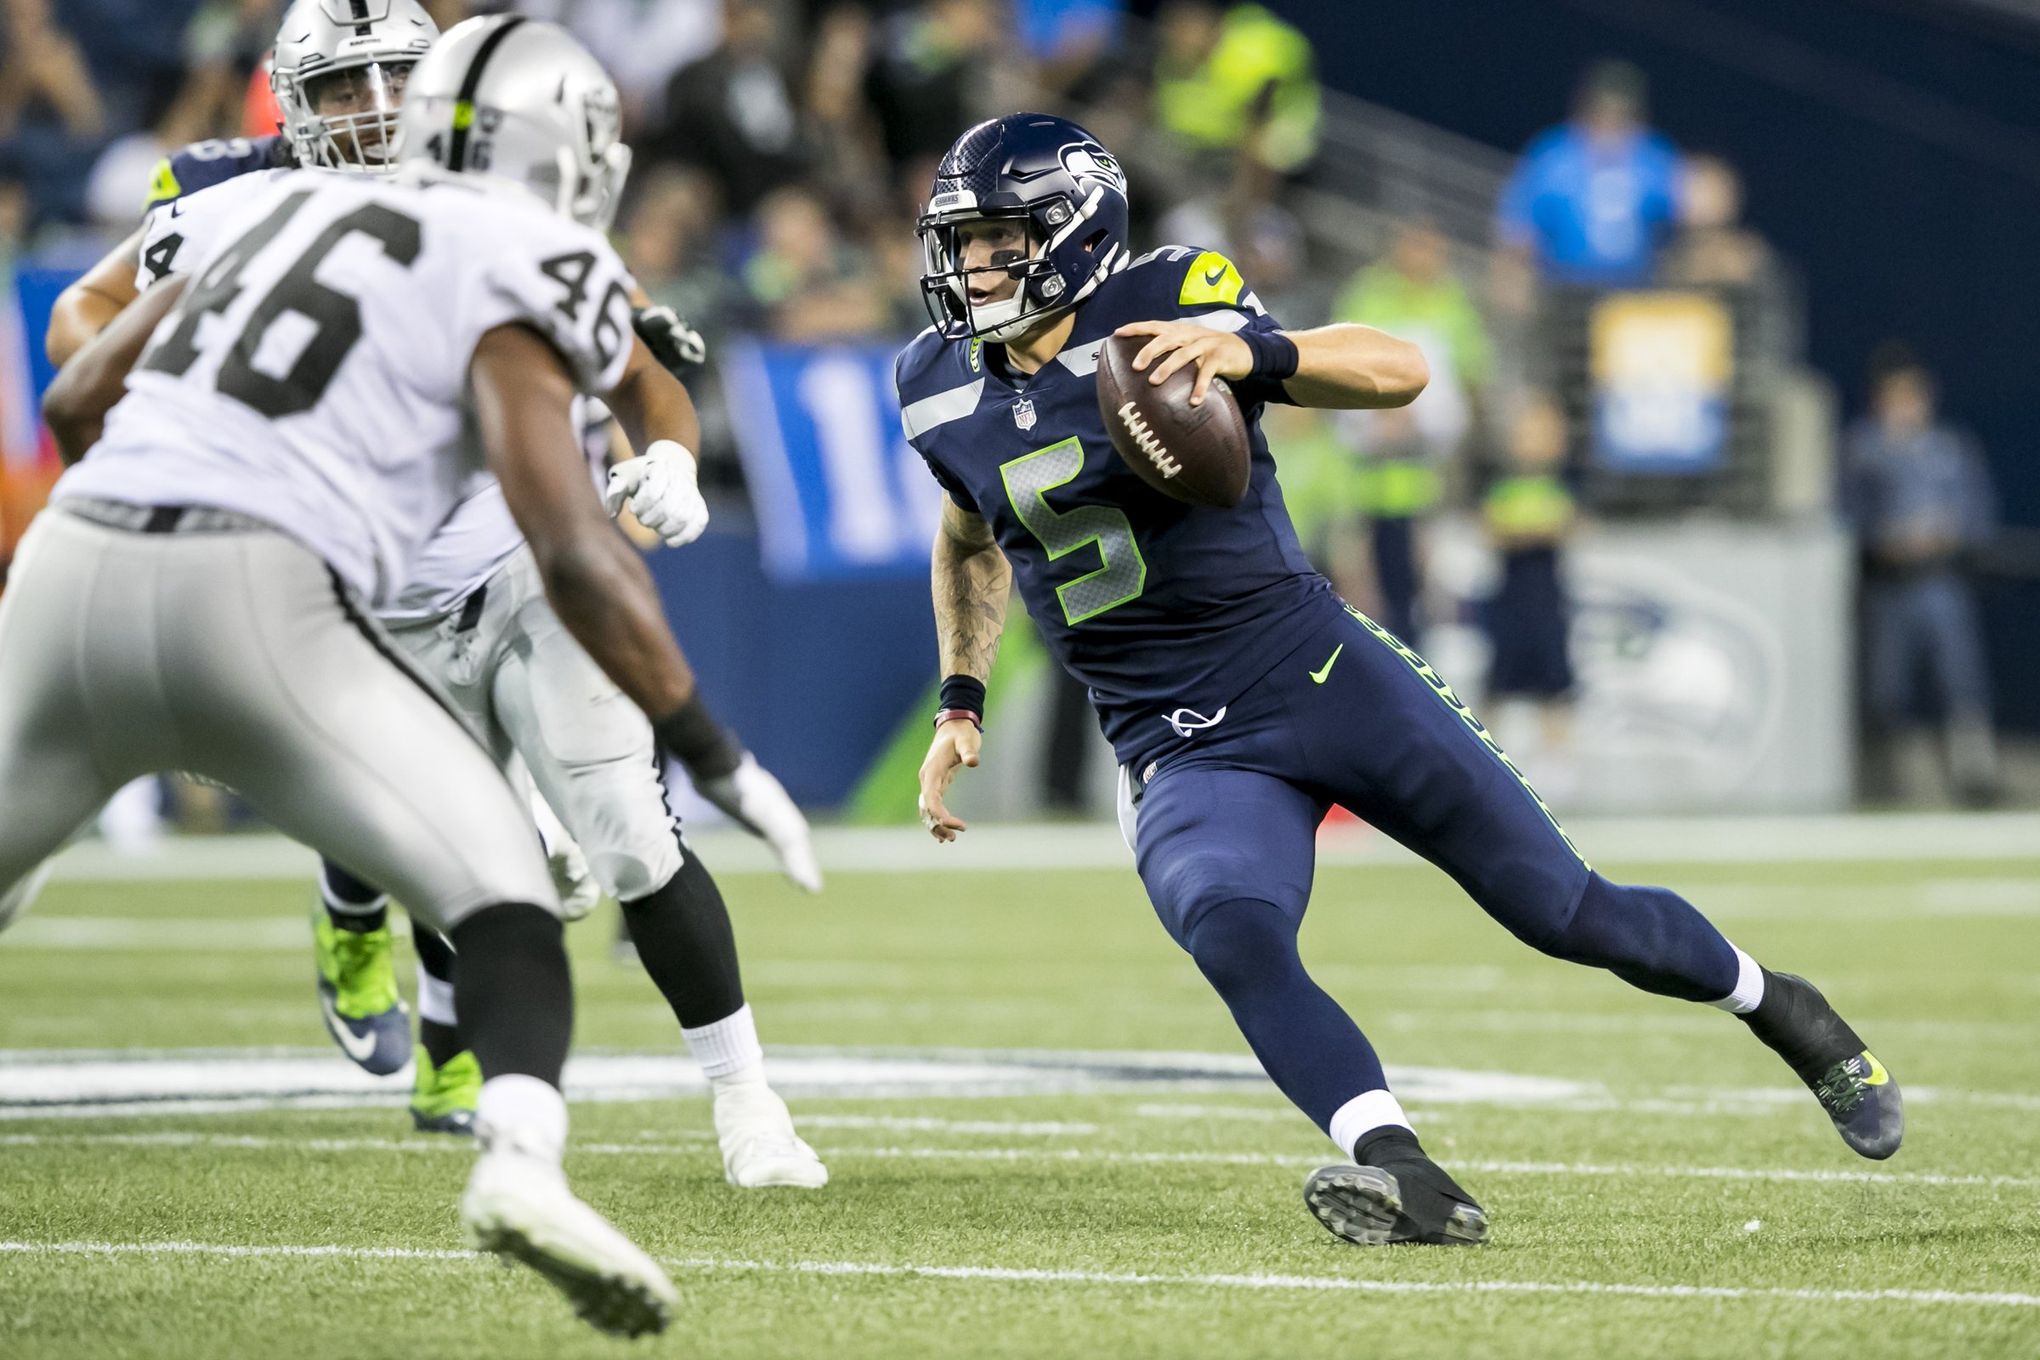 Photos: Seahawks fall to Raiders 30-19 in final preseason game | The Seattle Times